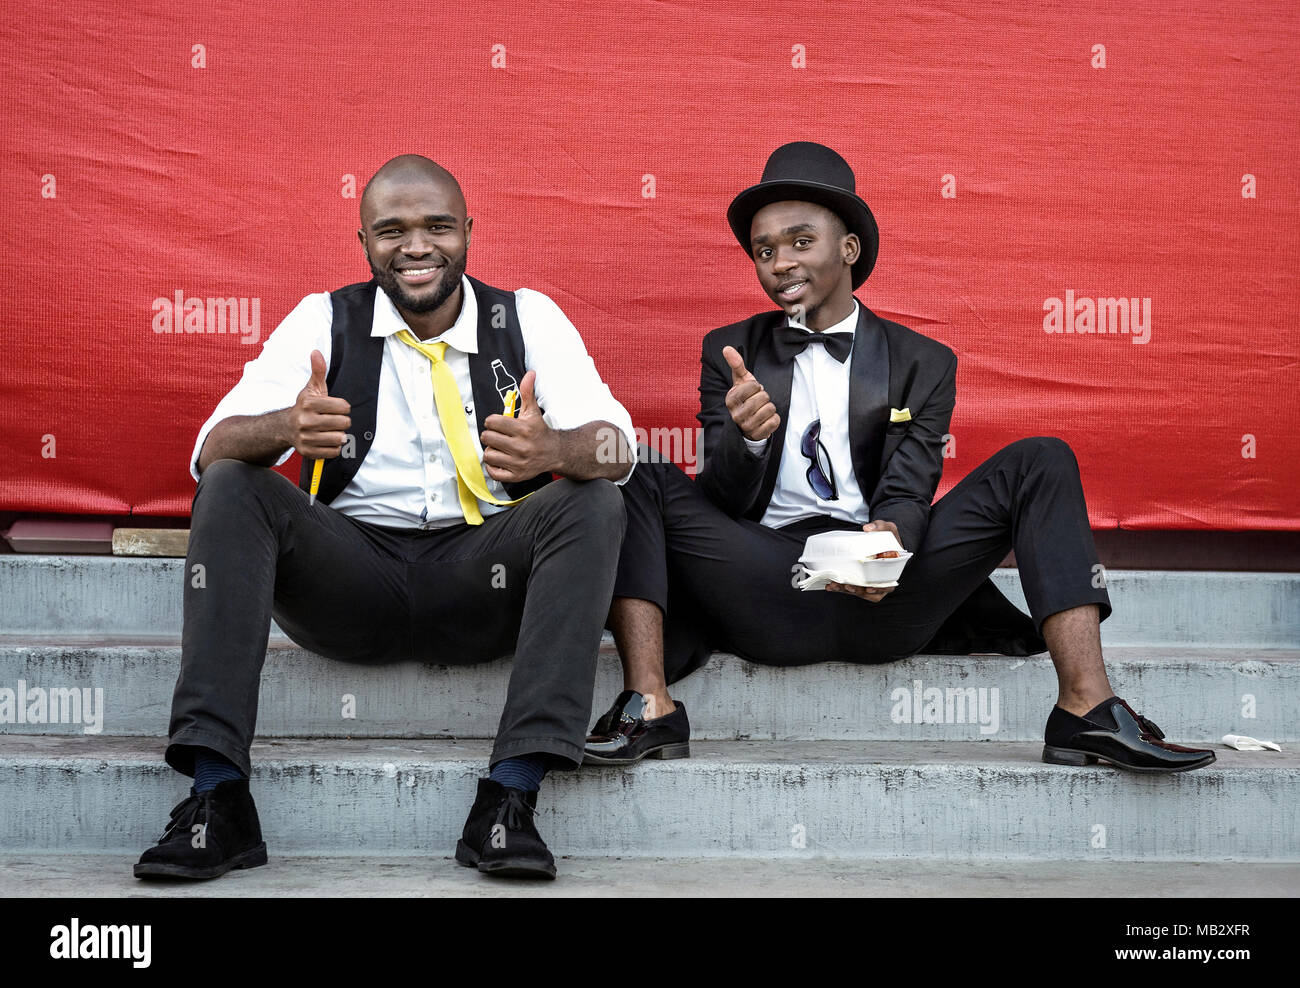 DURBAN, SOUTH AFRICA – June 1, 2017: Two young men in happy mood at the Durban July Horserace in South Africa. Stock Photo